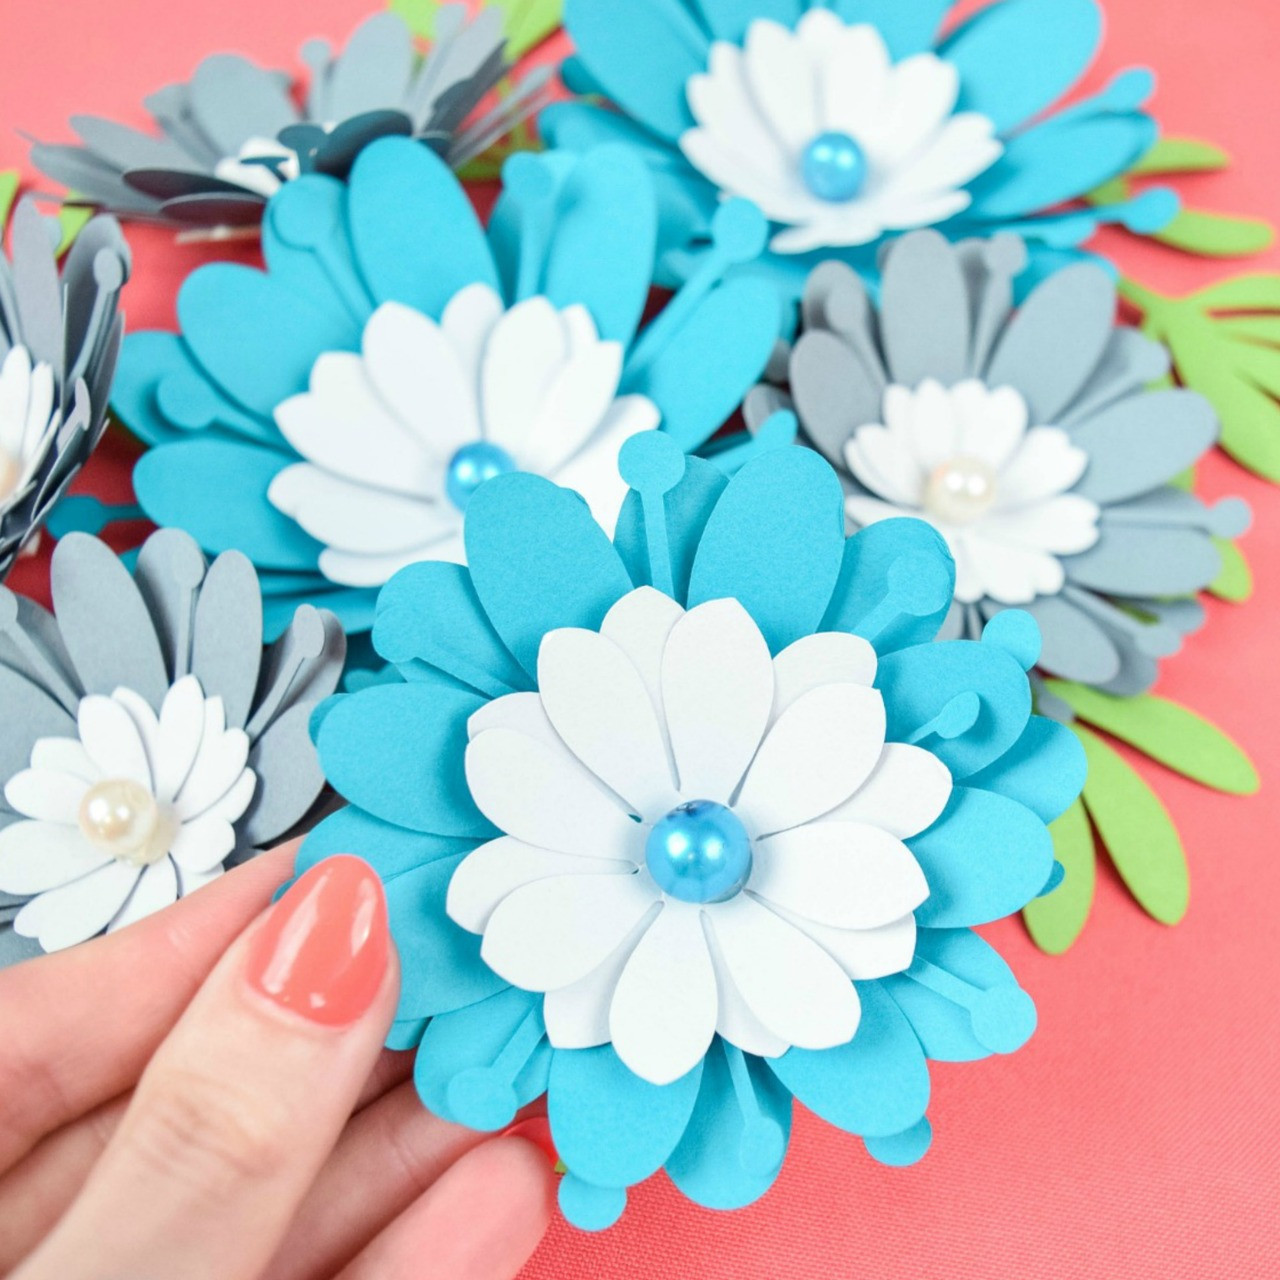 Paper Blooms Shaping Mat & Rolling Tool Kit by Catching Colorflies